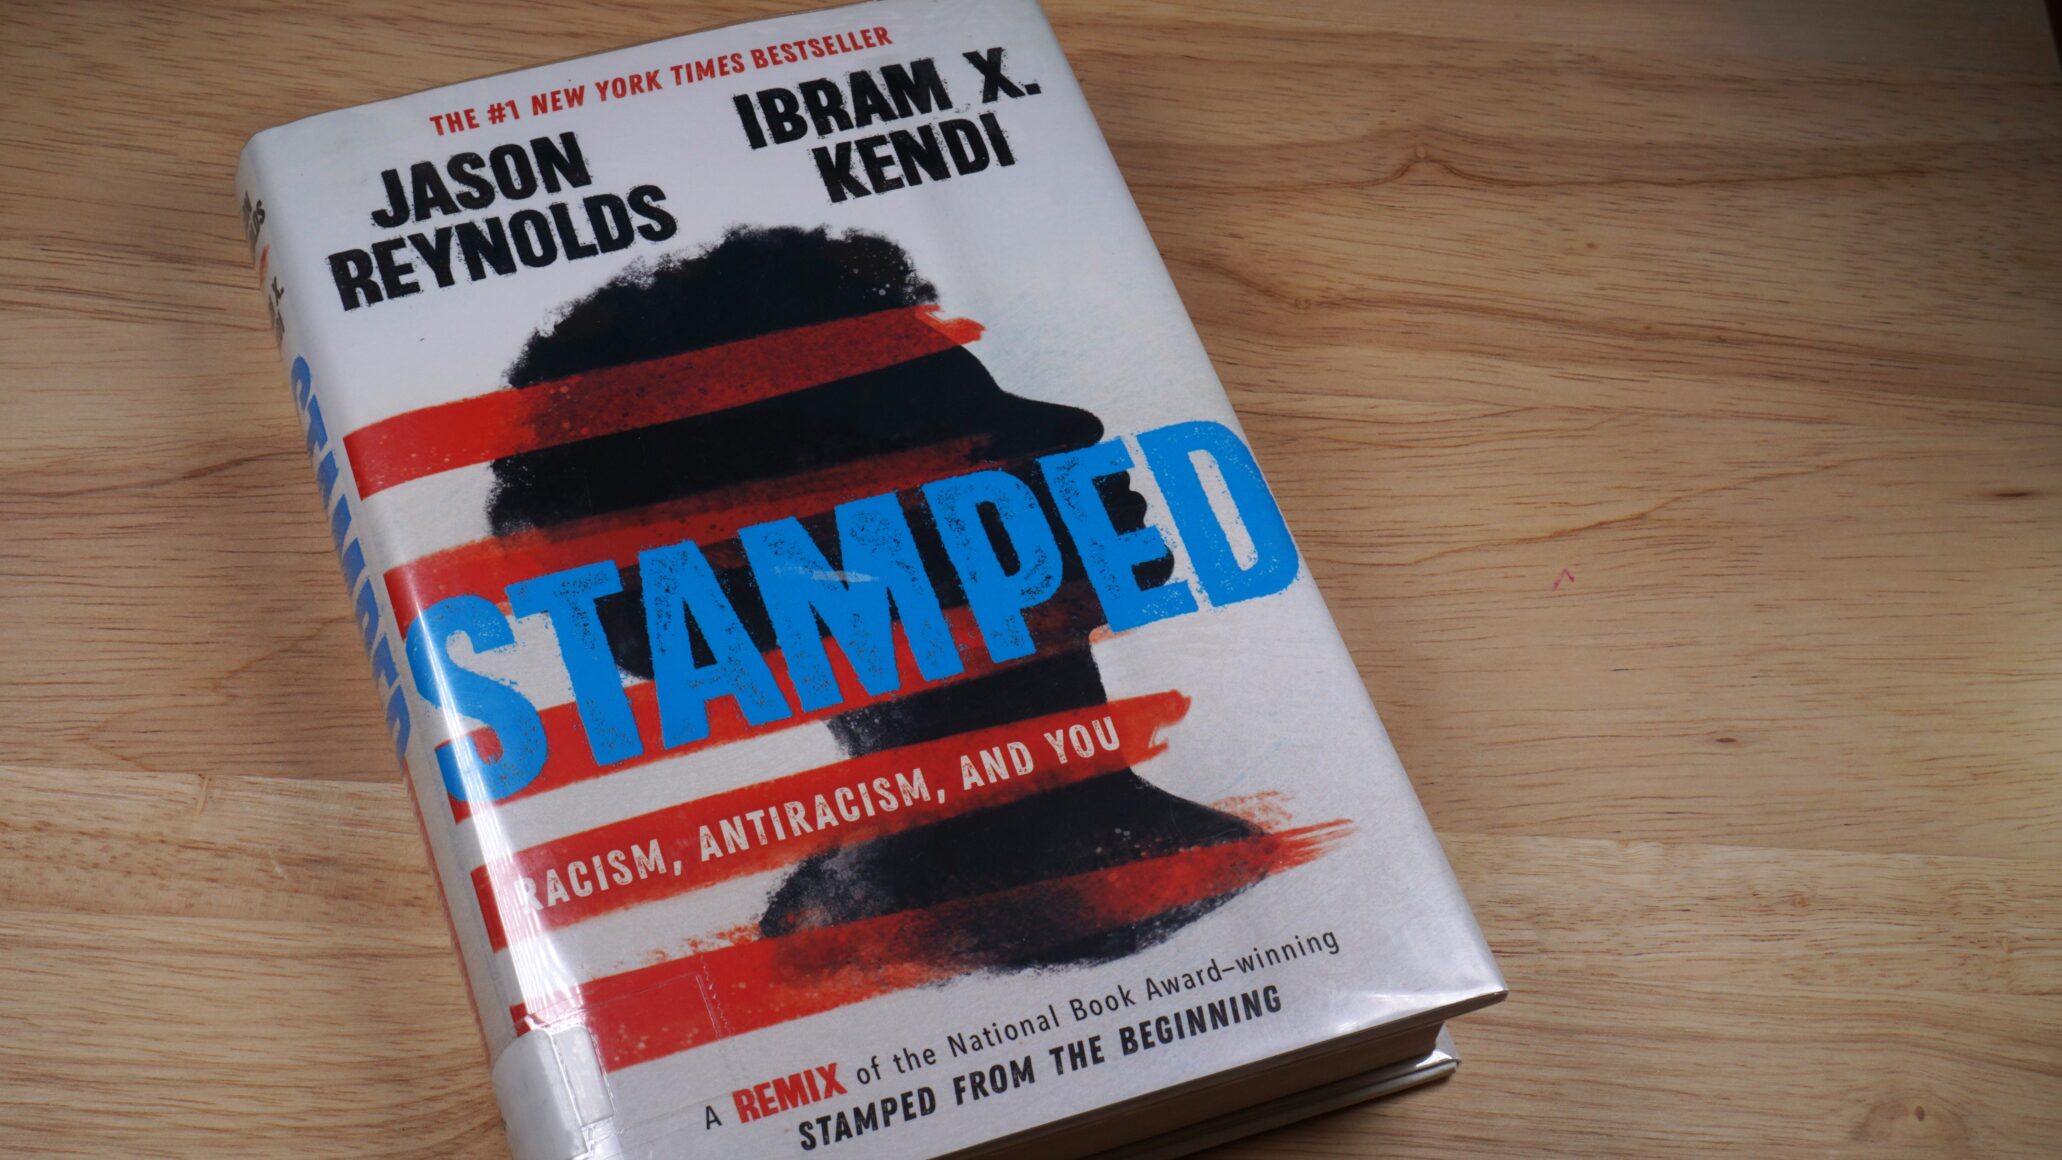 The book Stamped by Jason Reynolds and Ibram X. Kendi sits on a table.